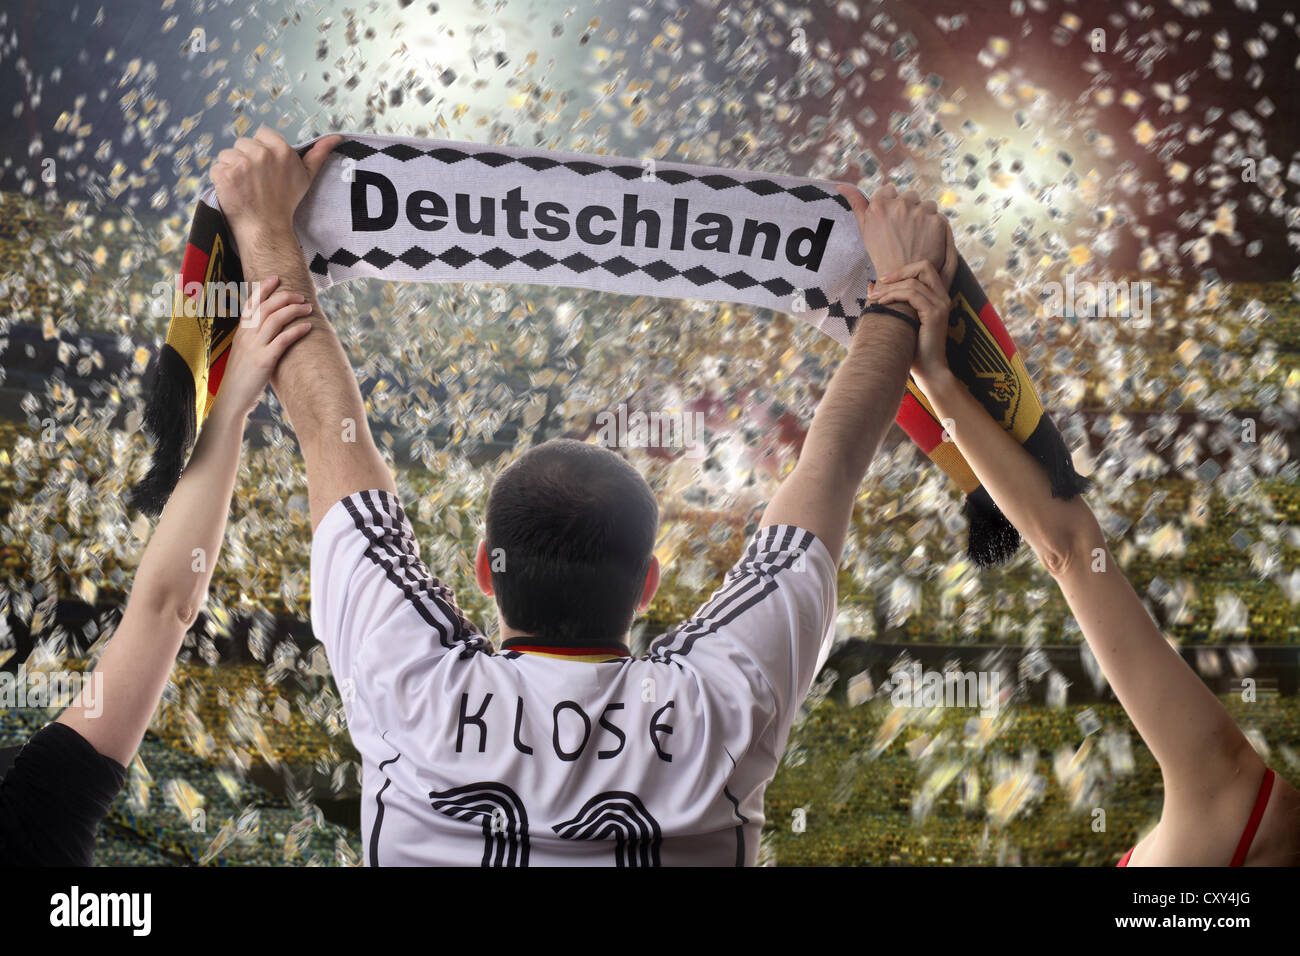 Football fan holding up a German supporters scarf, seen from behind, with confetti in a football stadium Stock Photo